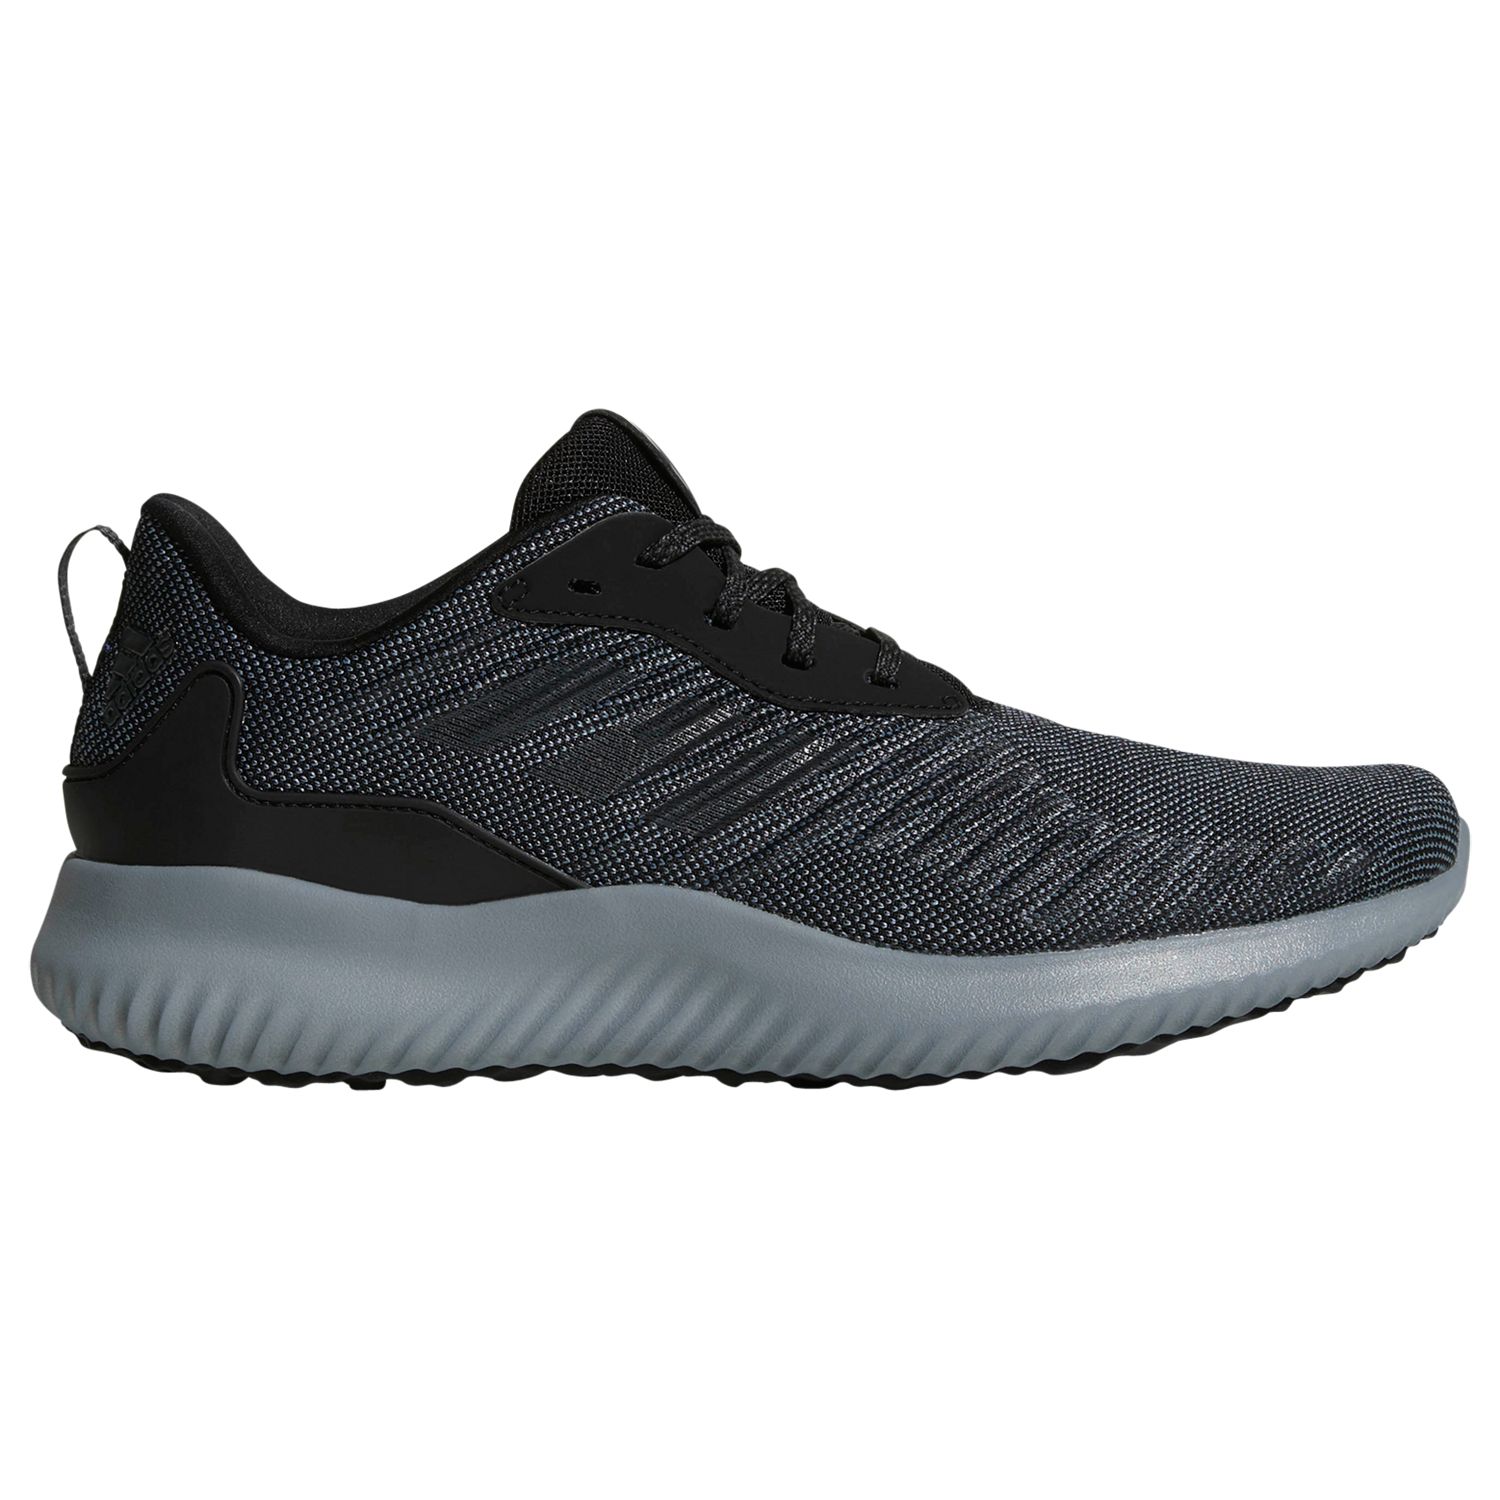 adidas Alphabounce RC Men's Running Shoes, Black, 8